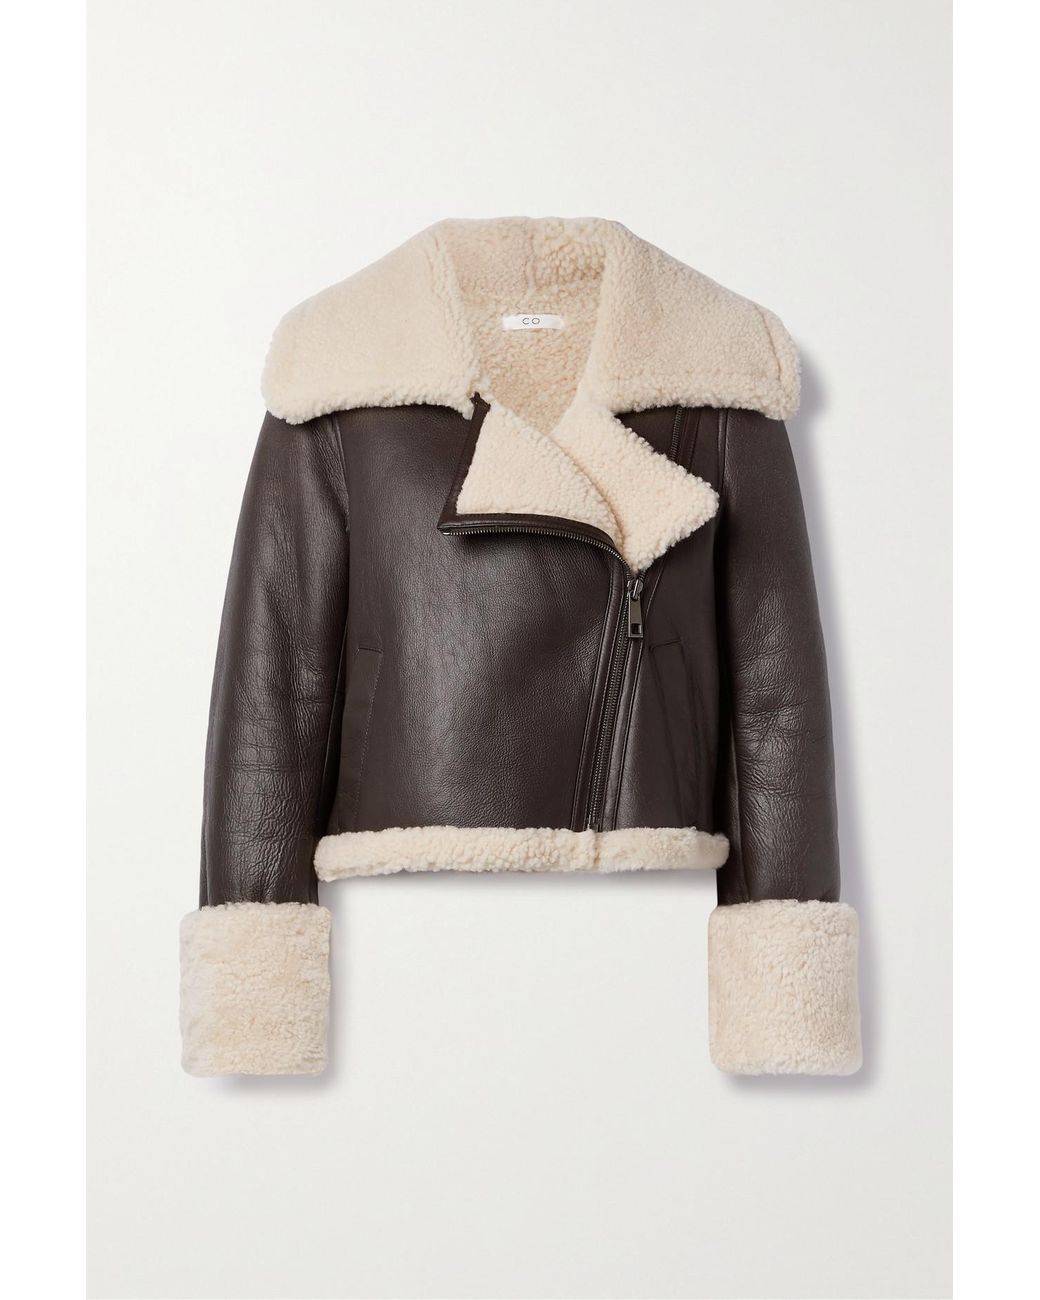 Co. Cropped Shearling Jacket in Black | Lyst